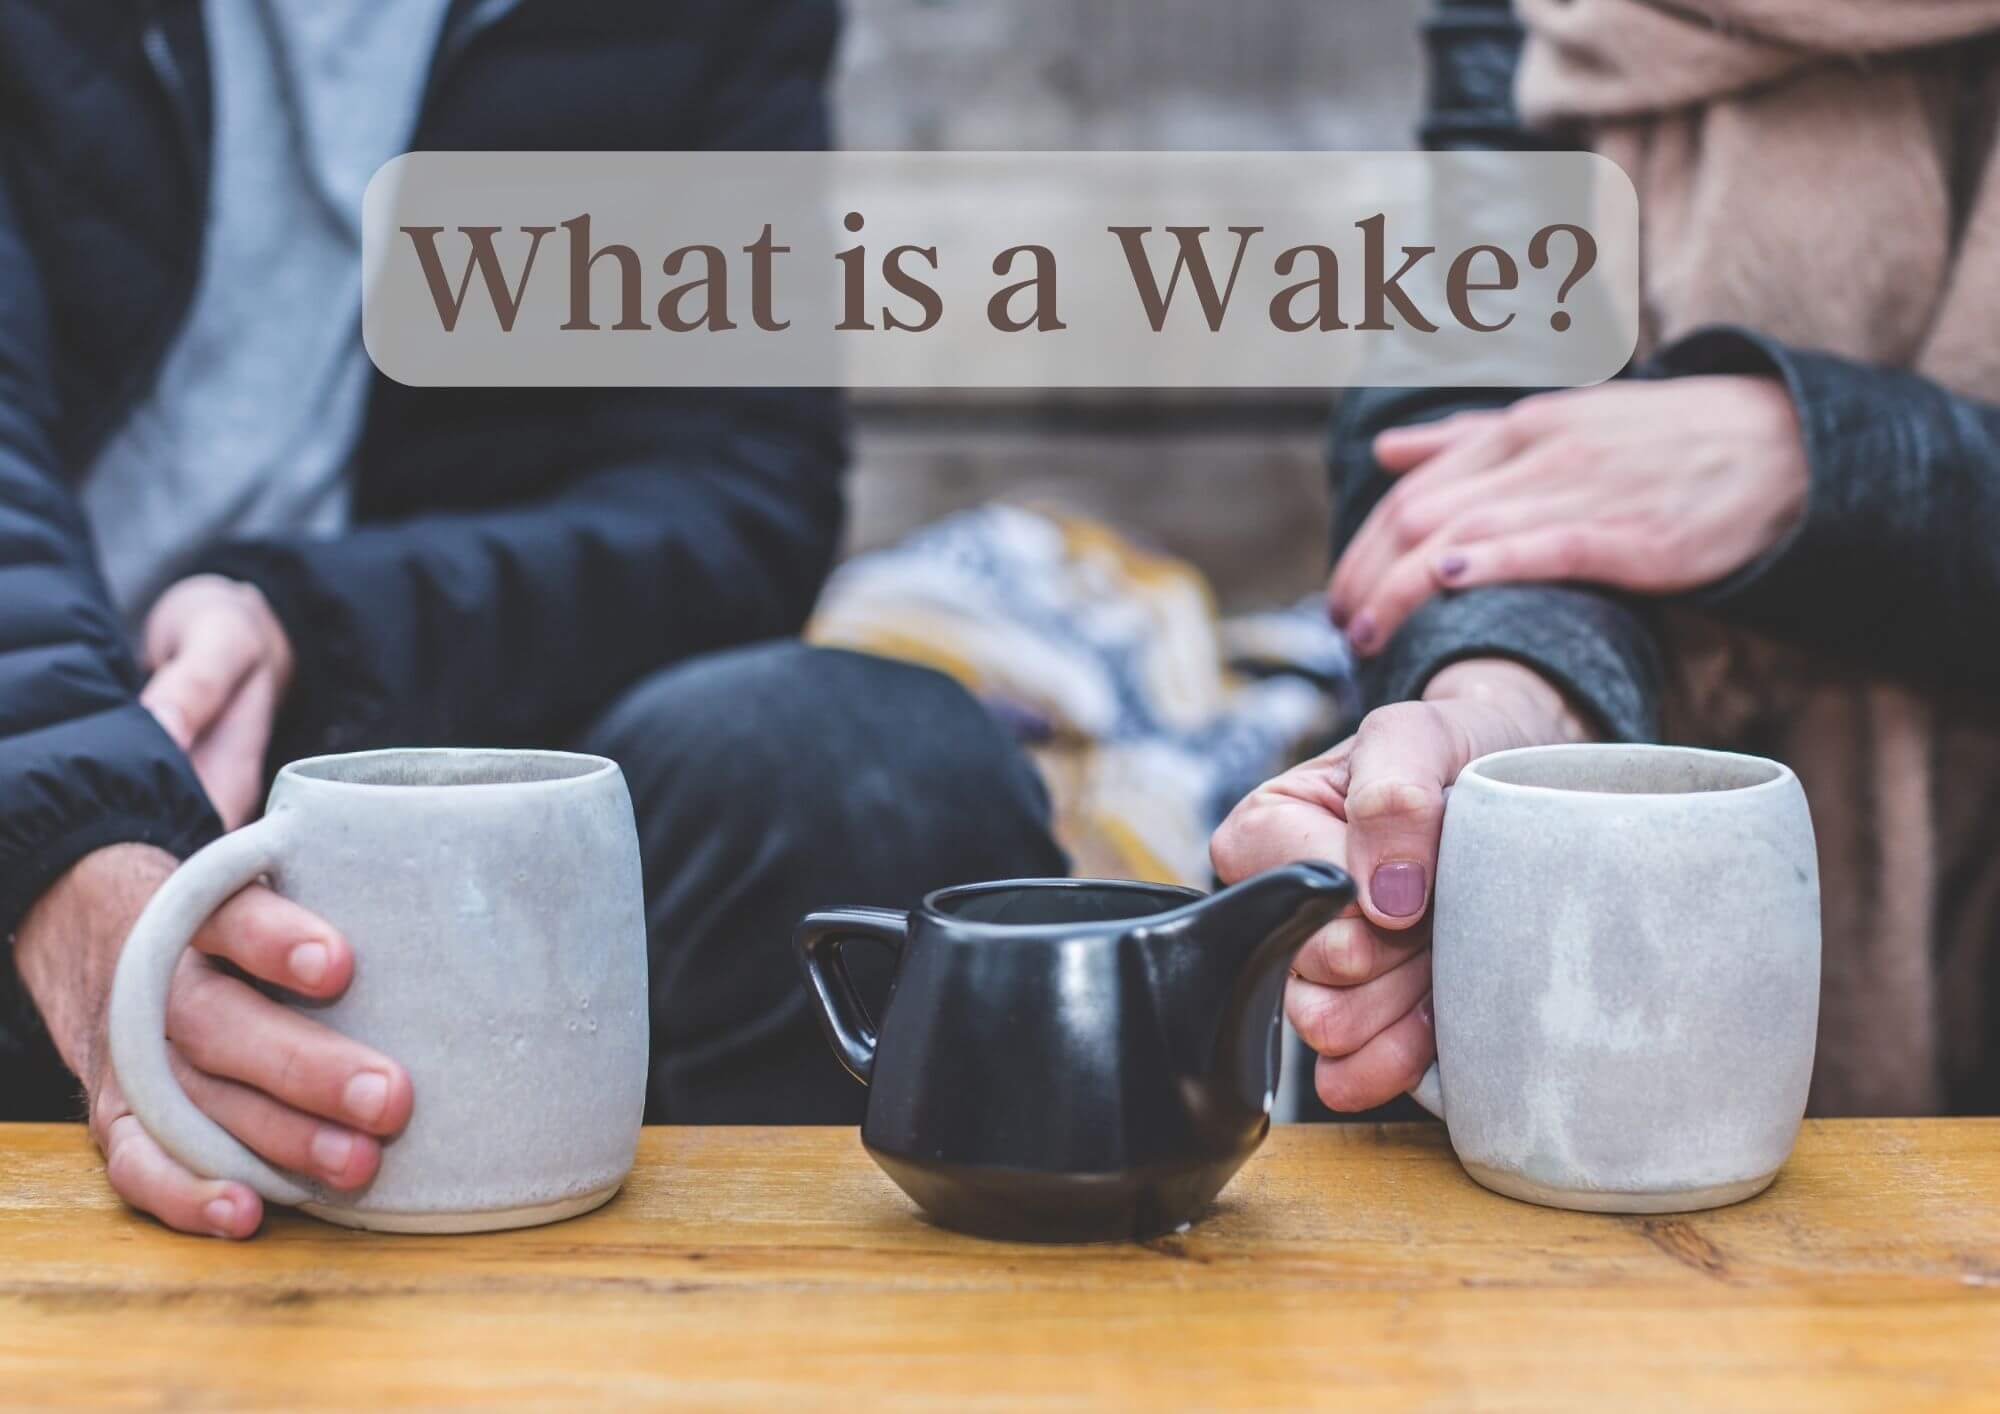 what is a wake, gathering of people having a cup of tea or coffee